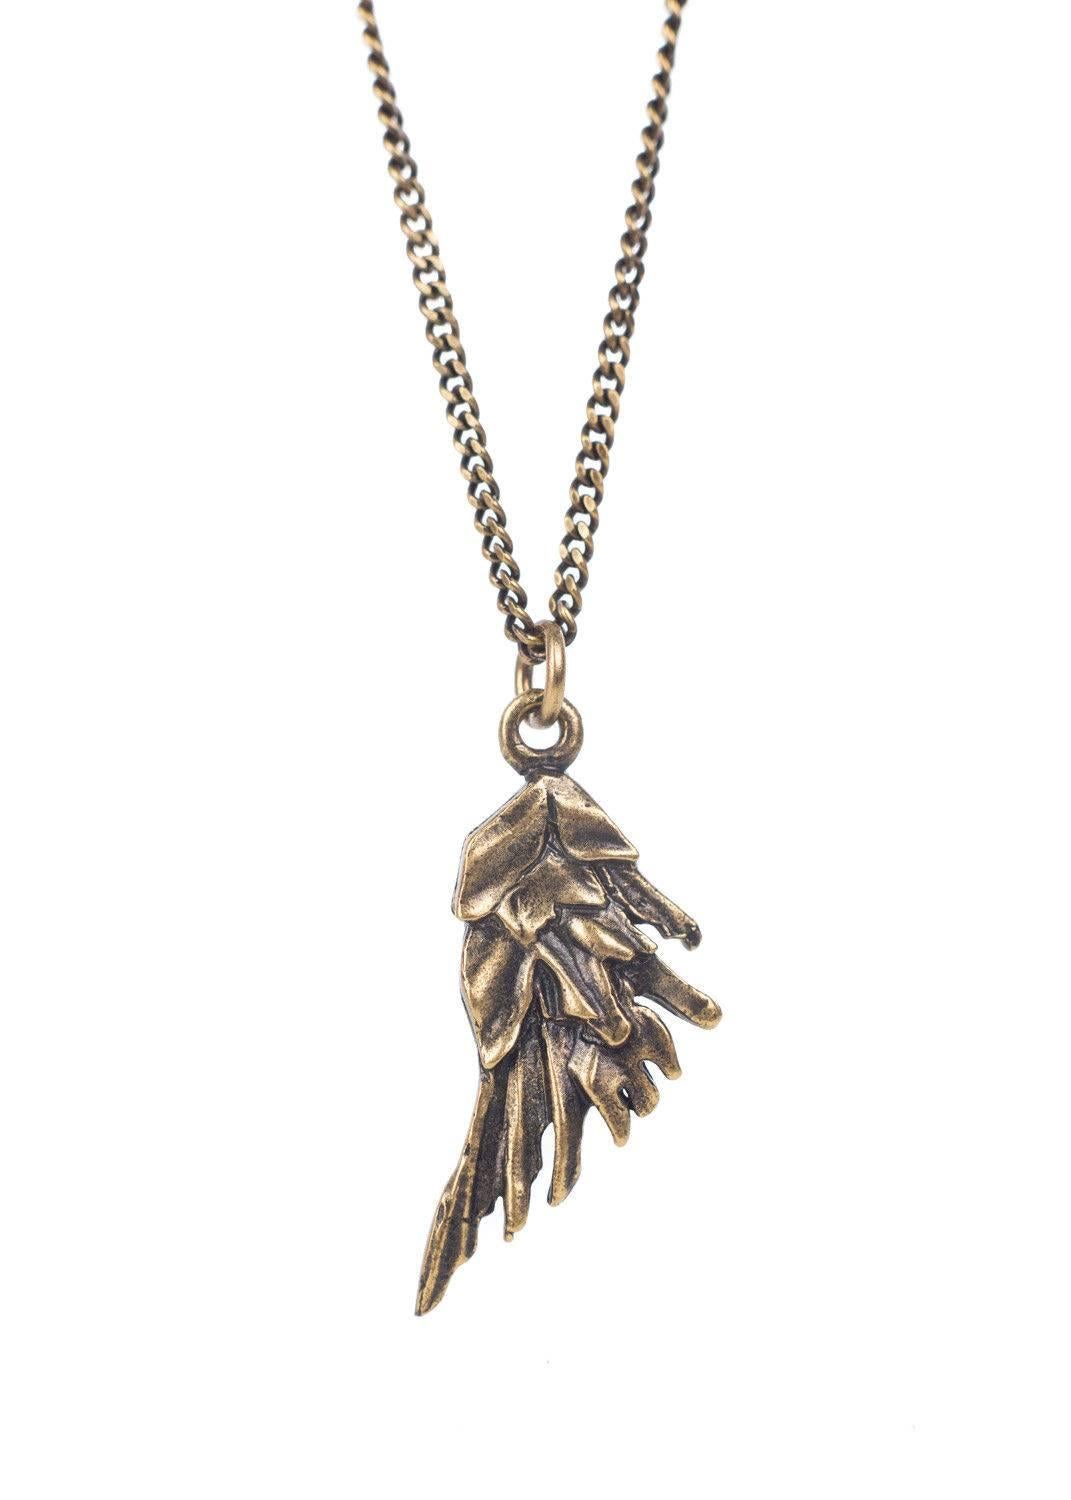 Get your Roberto Cavalli Necklace for the ultimate win. This necklace features a thin antique gold chain, small wing pendant, and tonal gold circular appliques. You can pair this necklace with a deep v neck dress and go. 

11 inch Length
1 inch